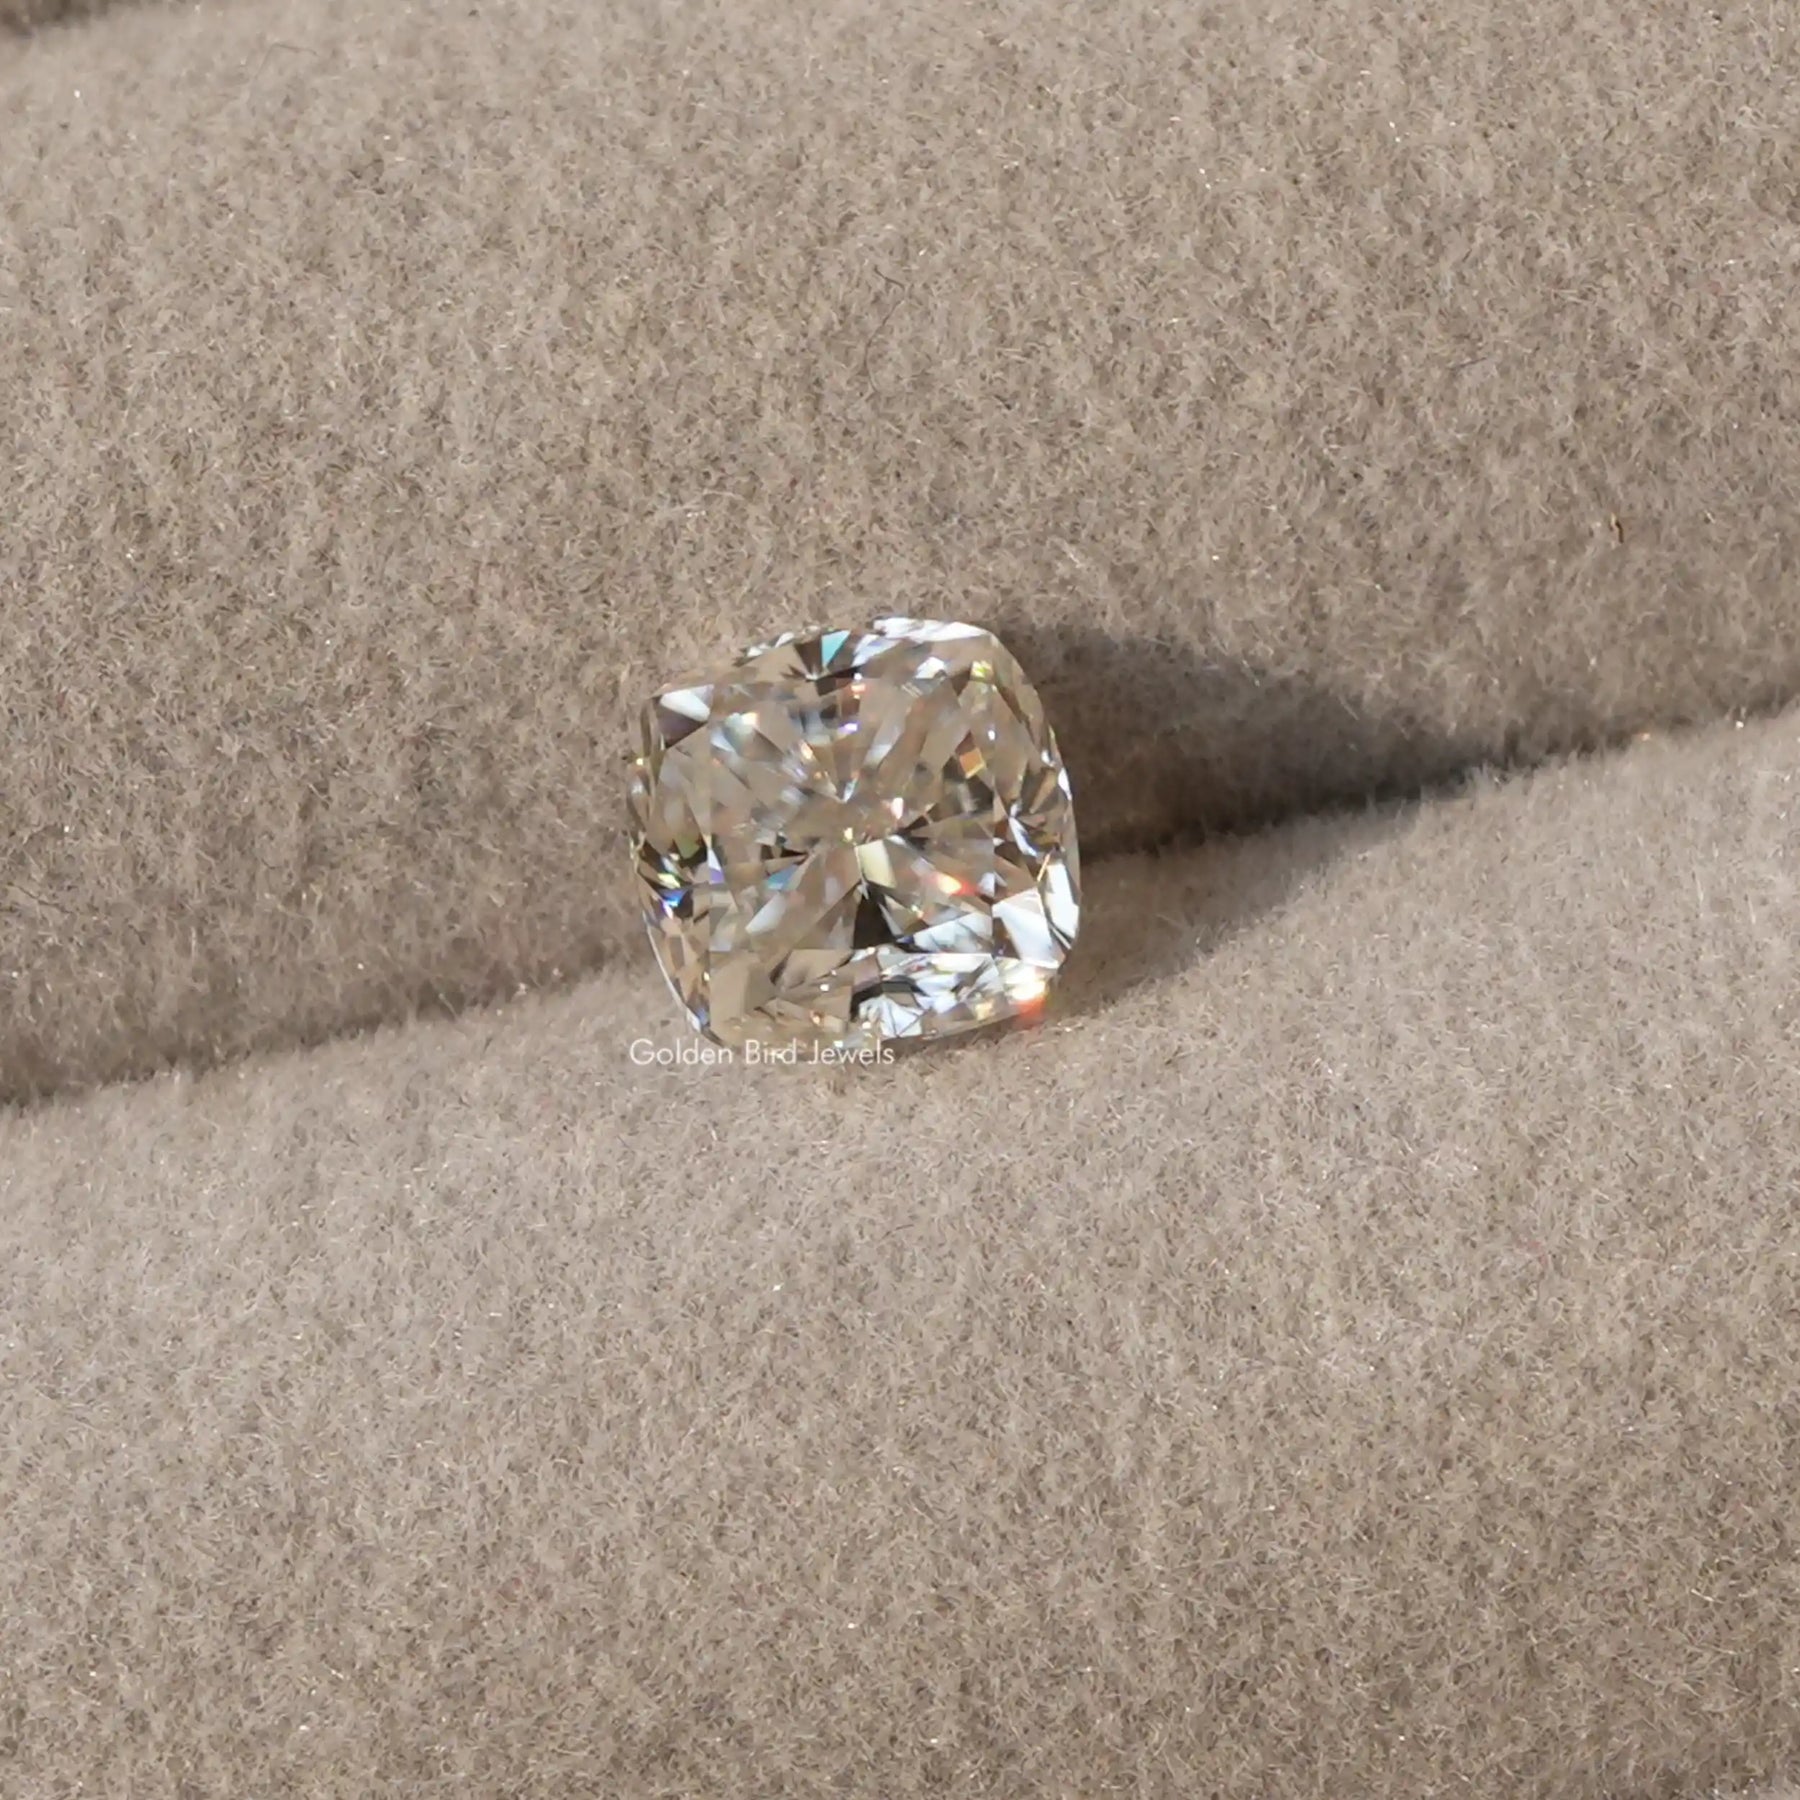 [This cushion cut loose moissanite crafted with vvs clarity]-[Golden Bird Jewels]